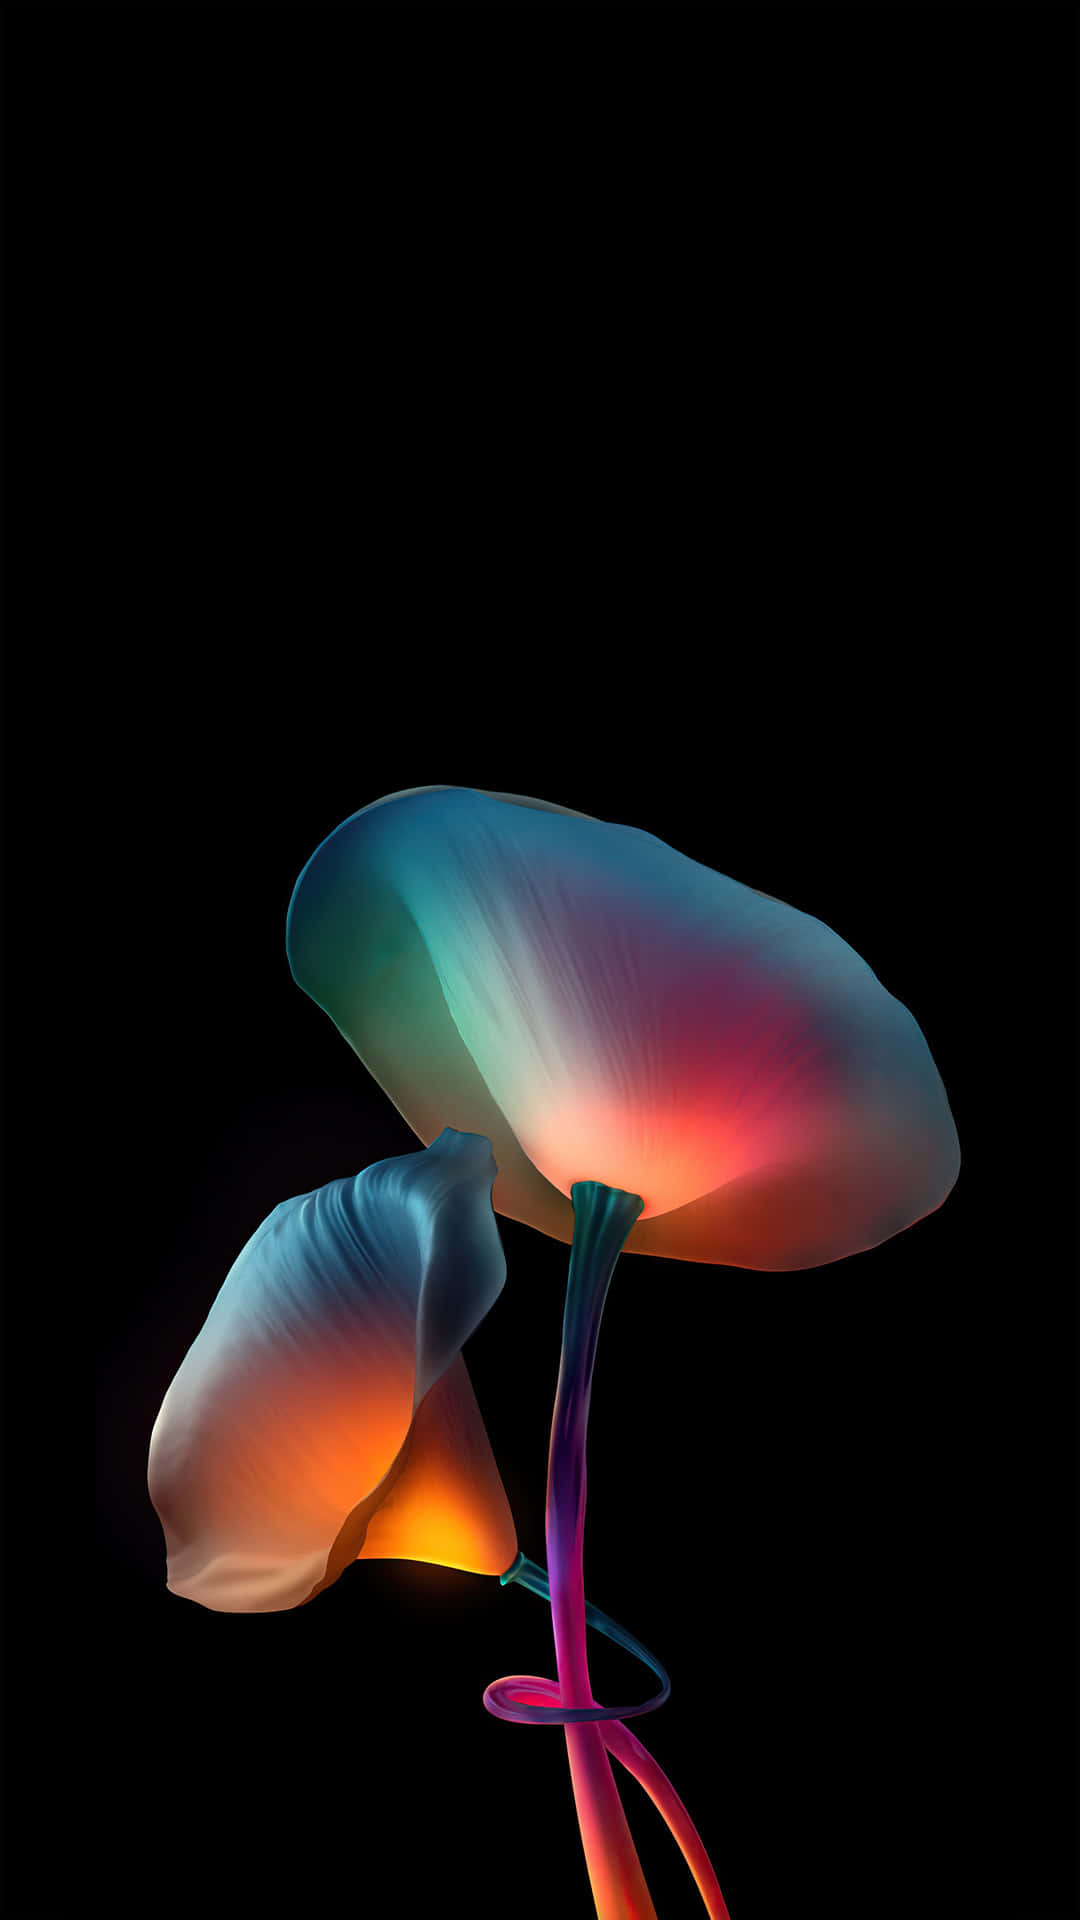 “Unbelievable Colorful OLED Screen” Wallpaper